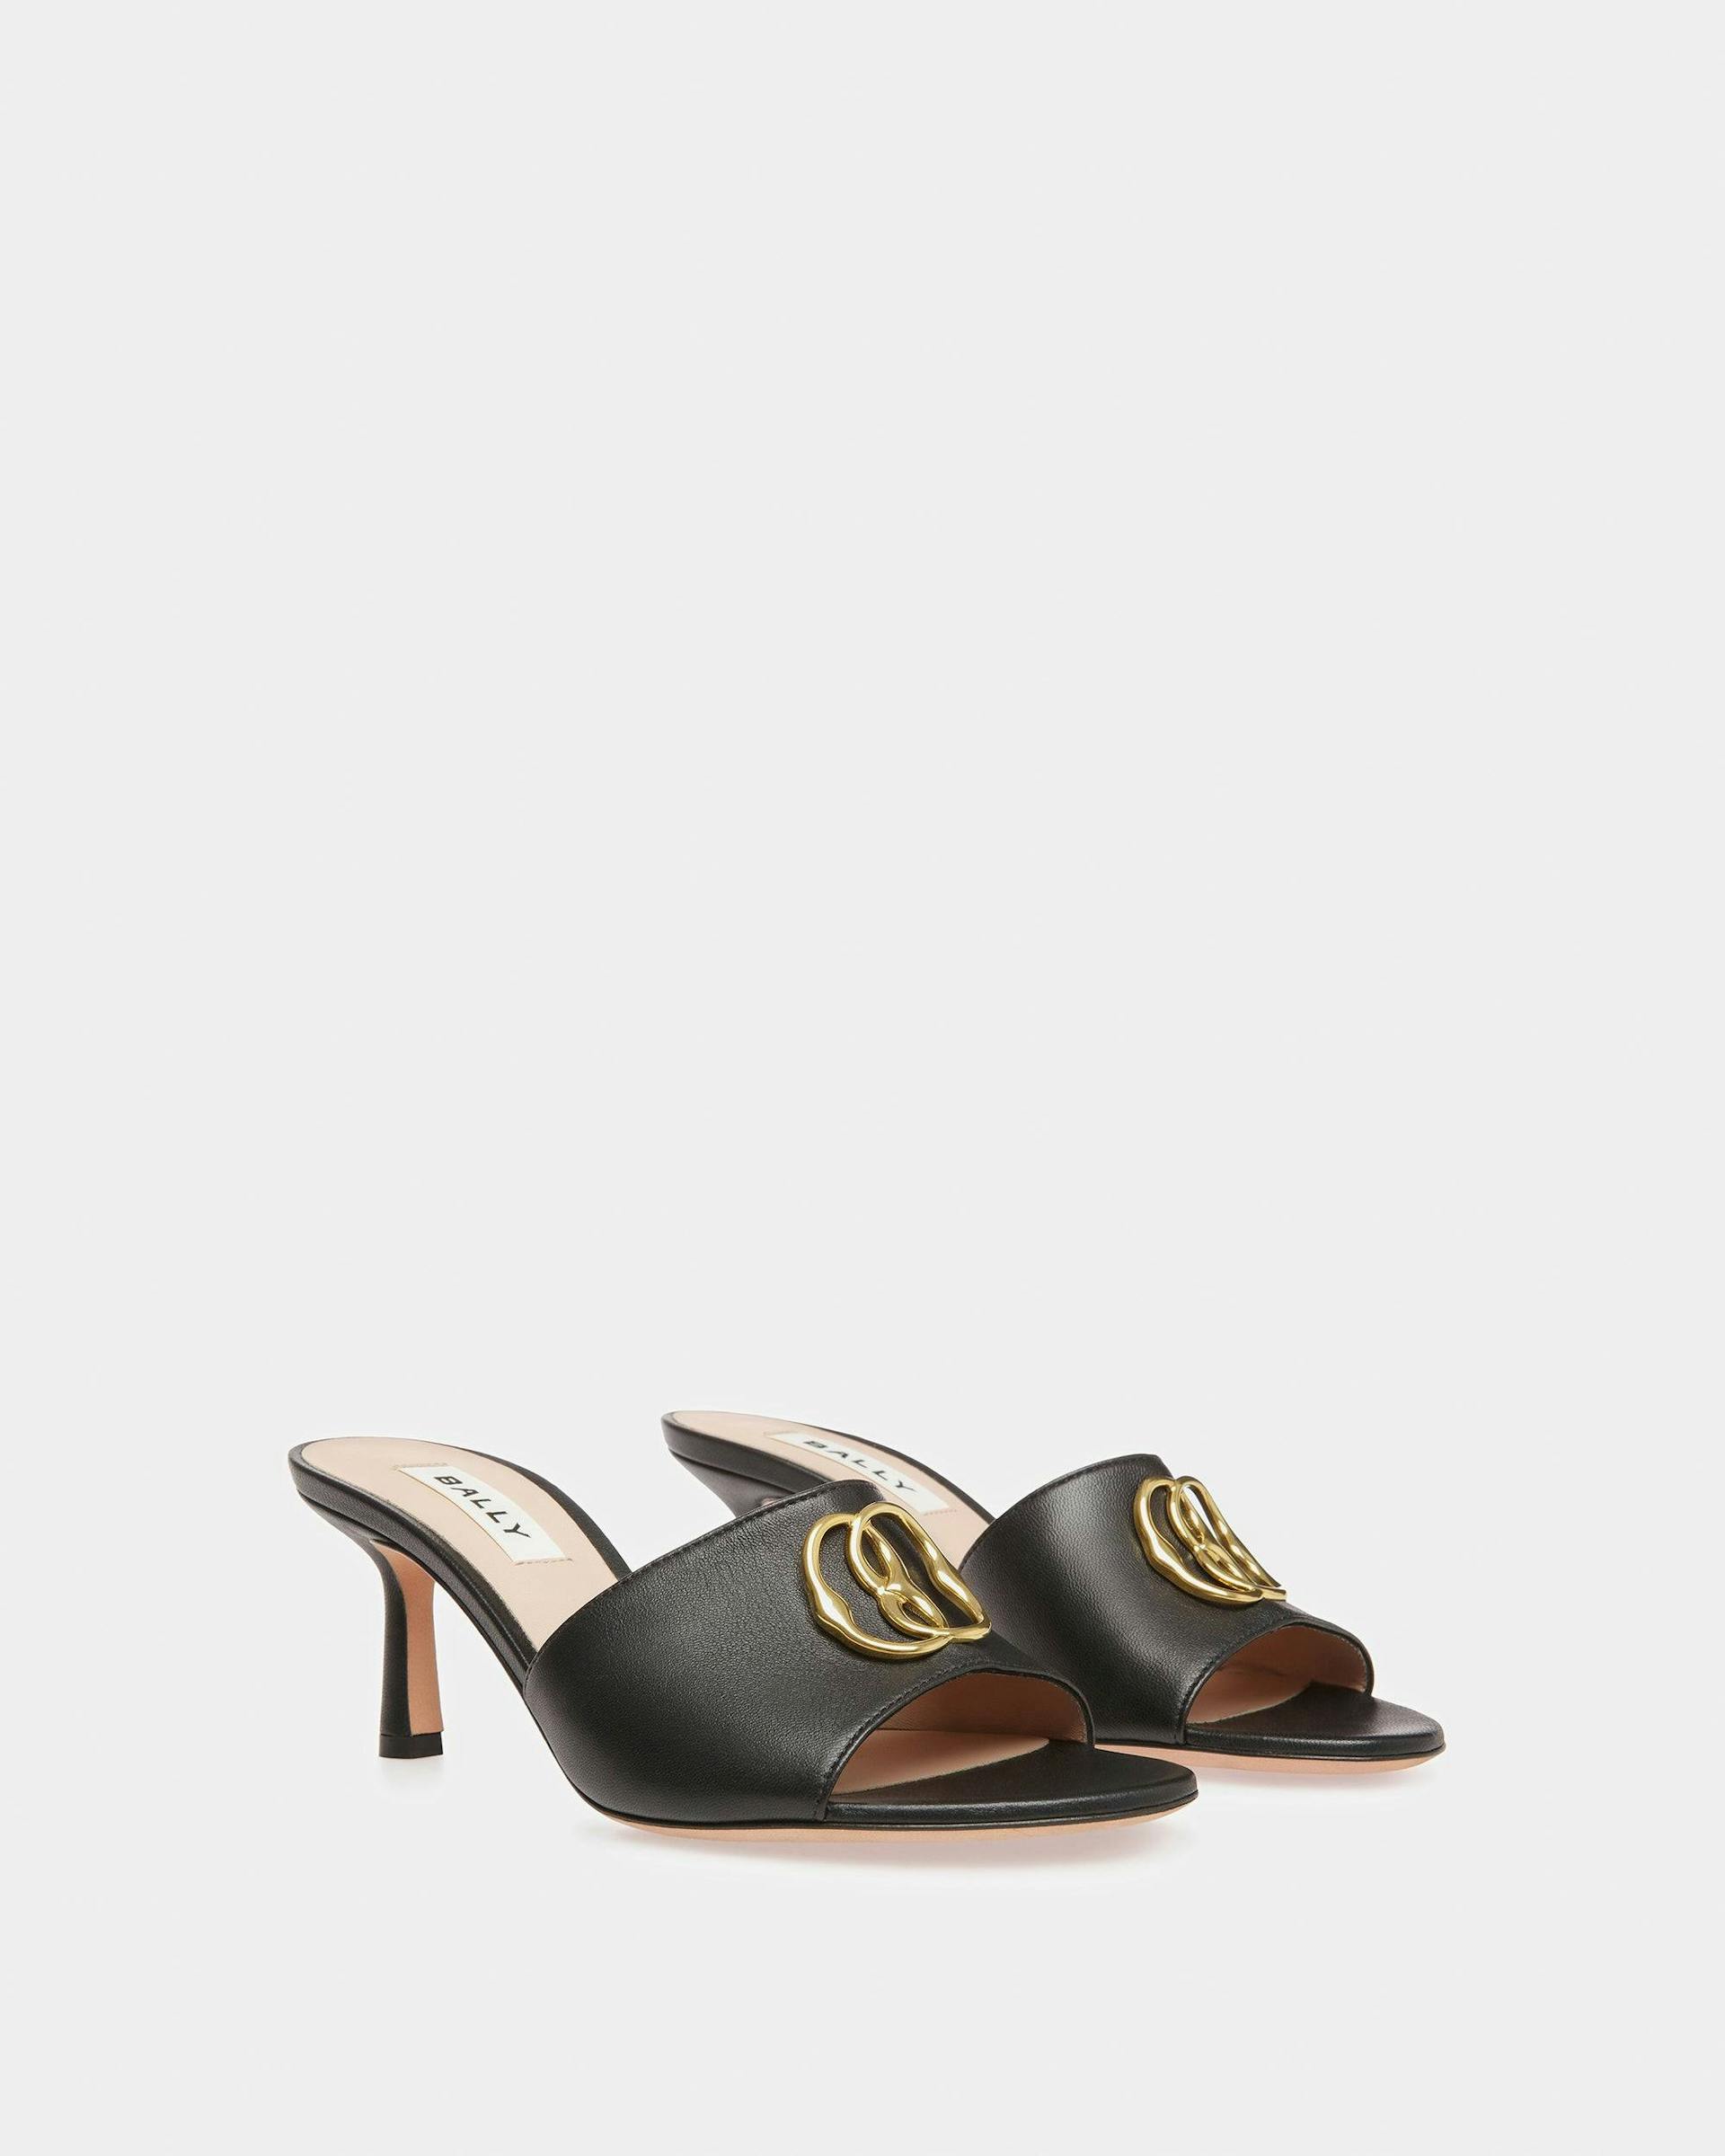 Women's Emblem Sandals In Black Leather | Bally | Still Life 3/4 Front